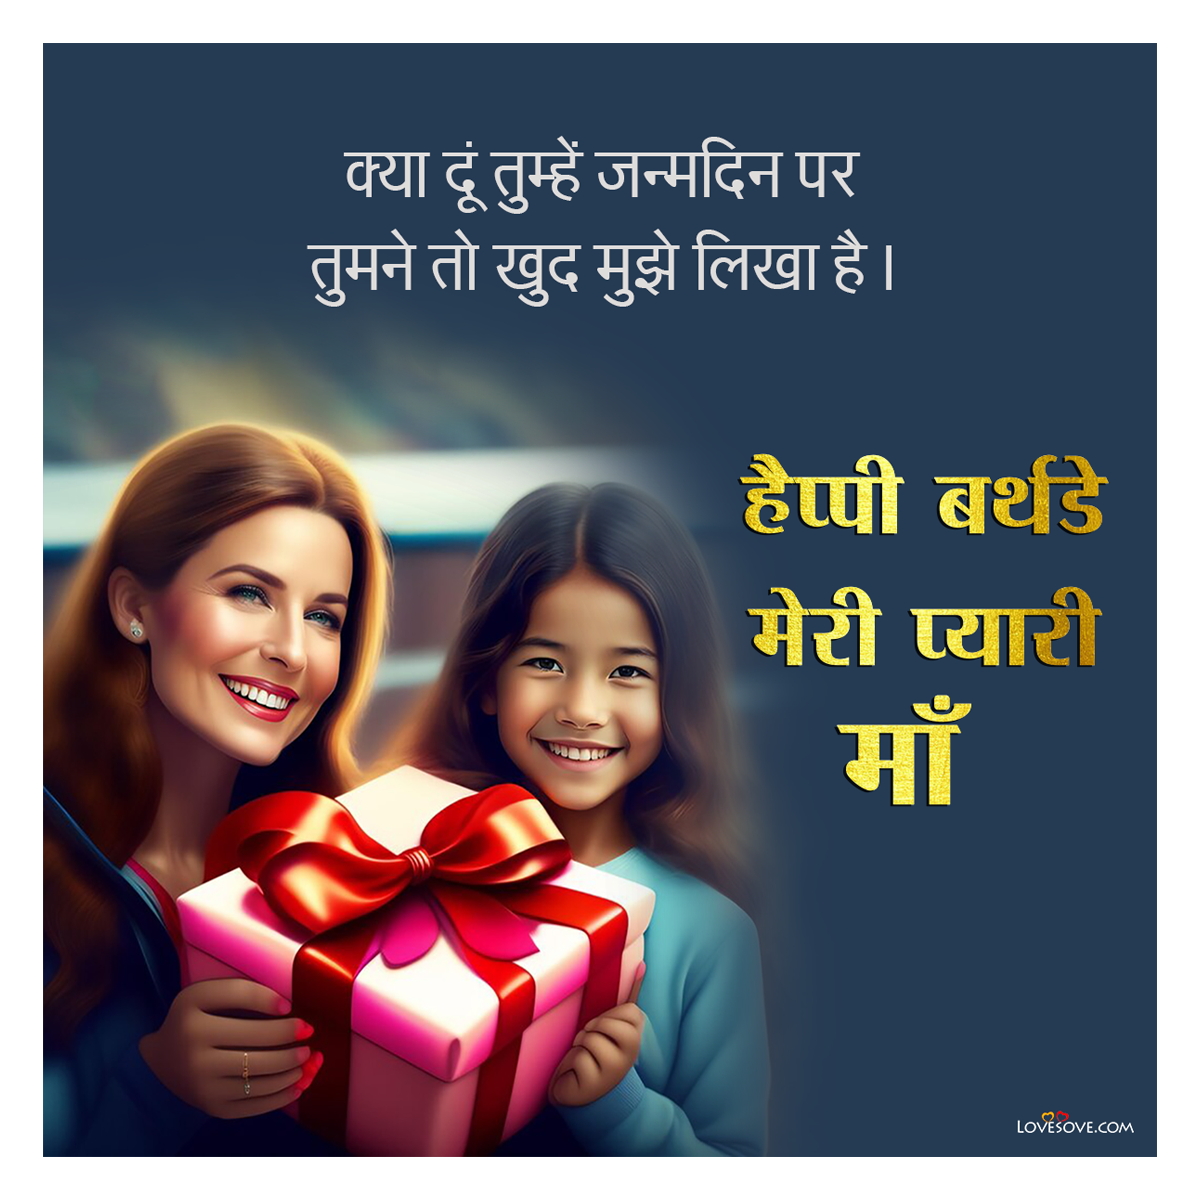 Cute Mother Daughter Quotes In Hindi, Bonding Mother Daughter Quotes In Hindi